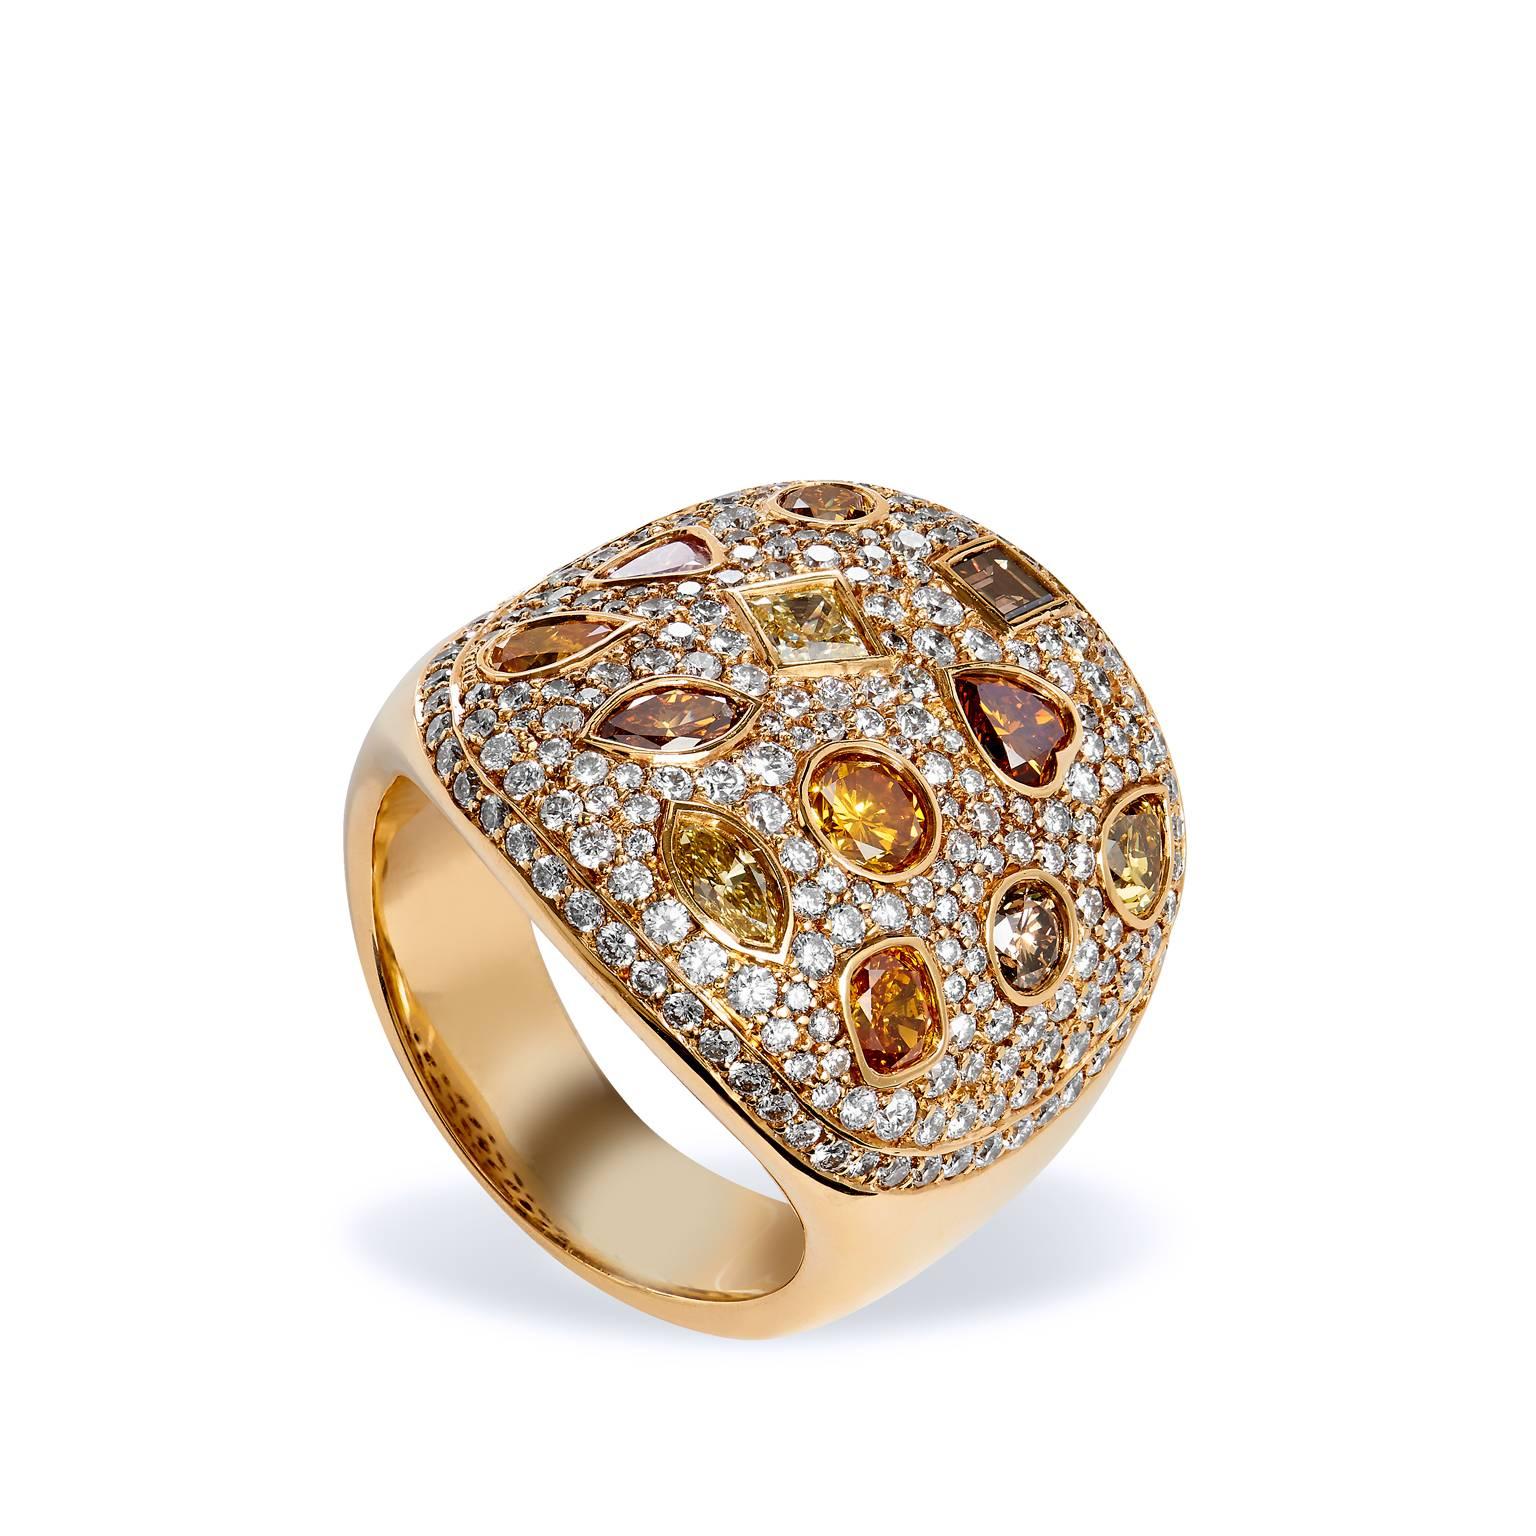 This bold 18kt yellow gold cocktail ring exudes pure glamour. The oval shape ring features a variety of natural colored diamonds totaling 1.96cts set on a twinkling canvas of 1.68ct pave diamonds graded F-VS. 